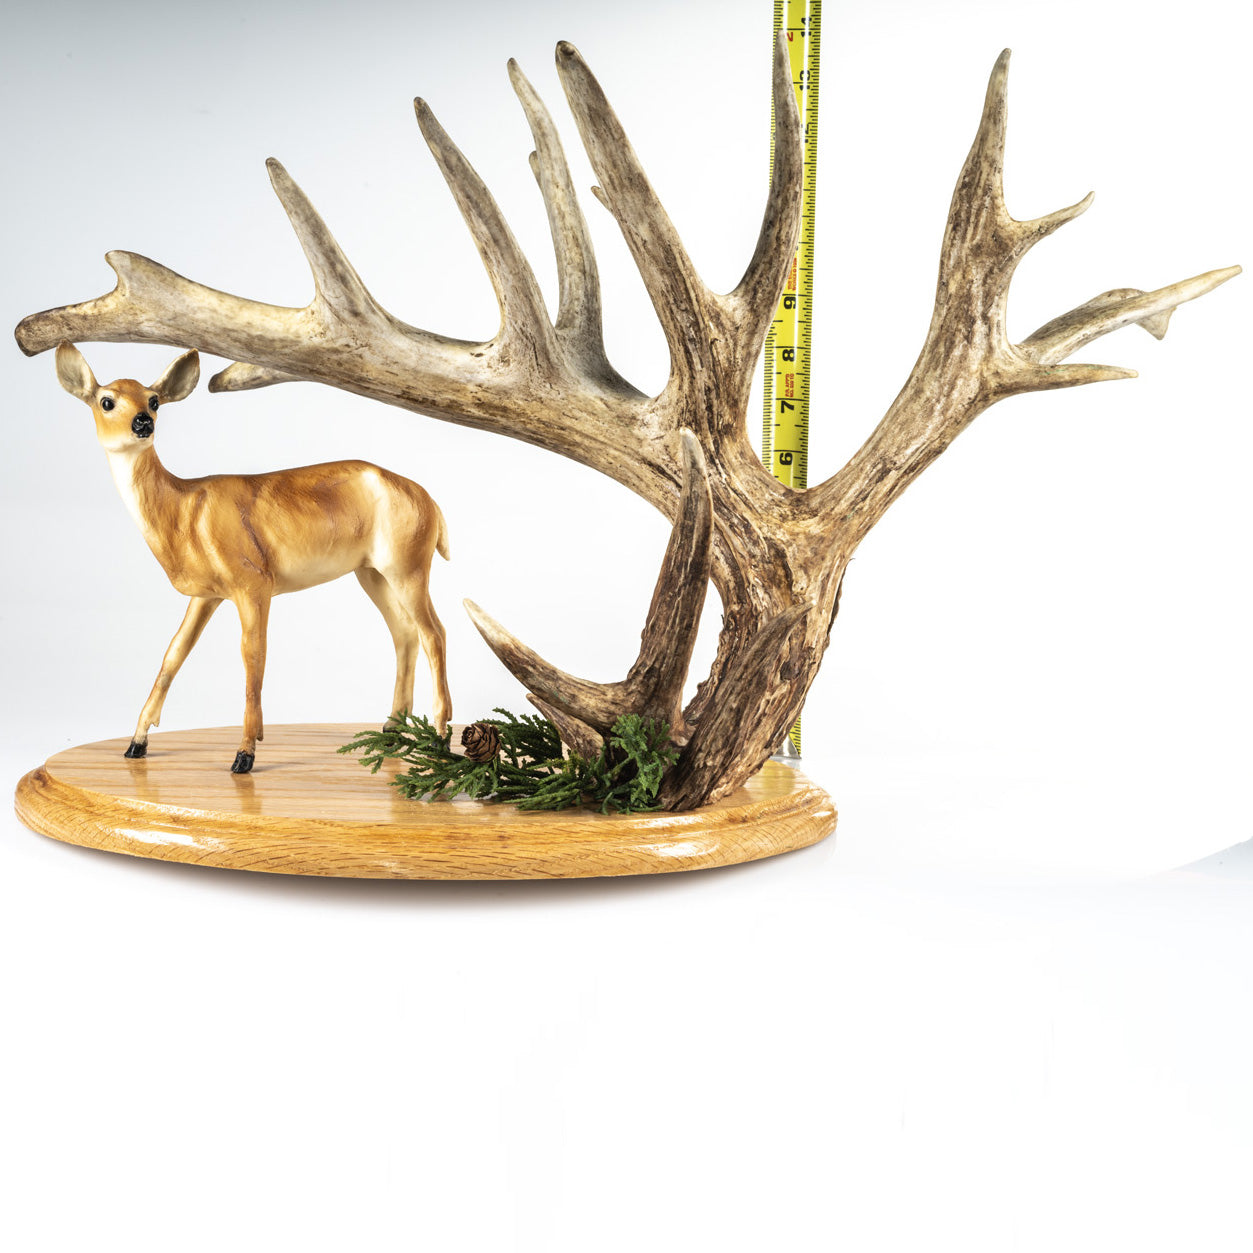 Awesome Whitetail Antler surrounding an Antique Breyer’s Doe statue! (Auction #007)